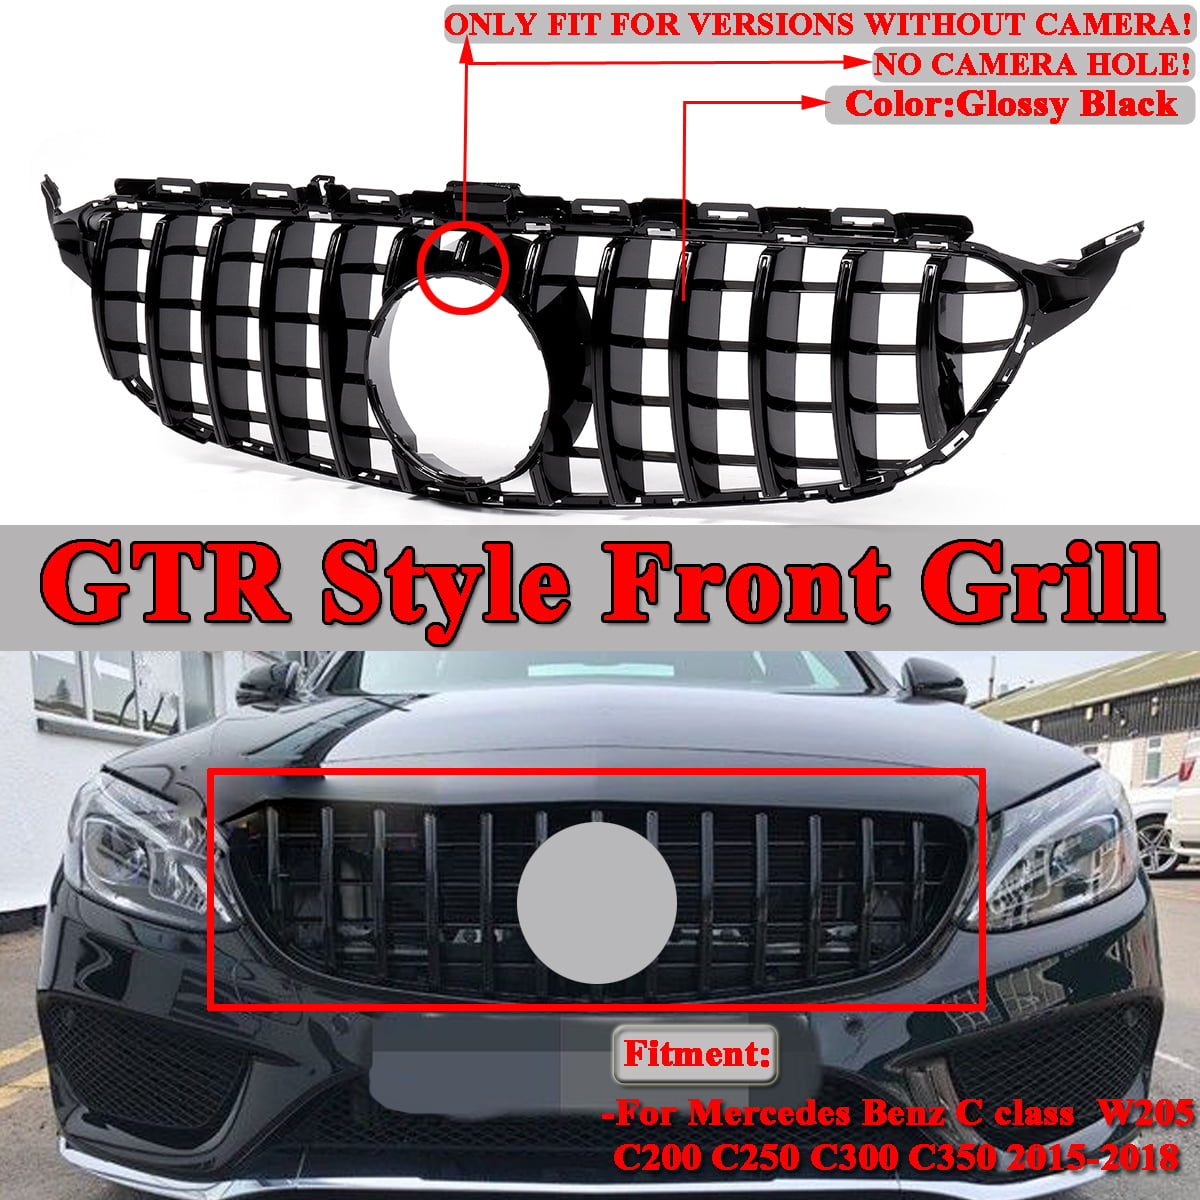 New GT-R Style Grille For Mercedes Benz C Class C200 C250 C300 C350 W205 2015-2018 Grill Glossy Black With Camera Hole without emblem 2016 2017 